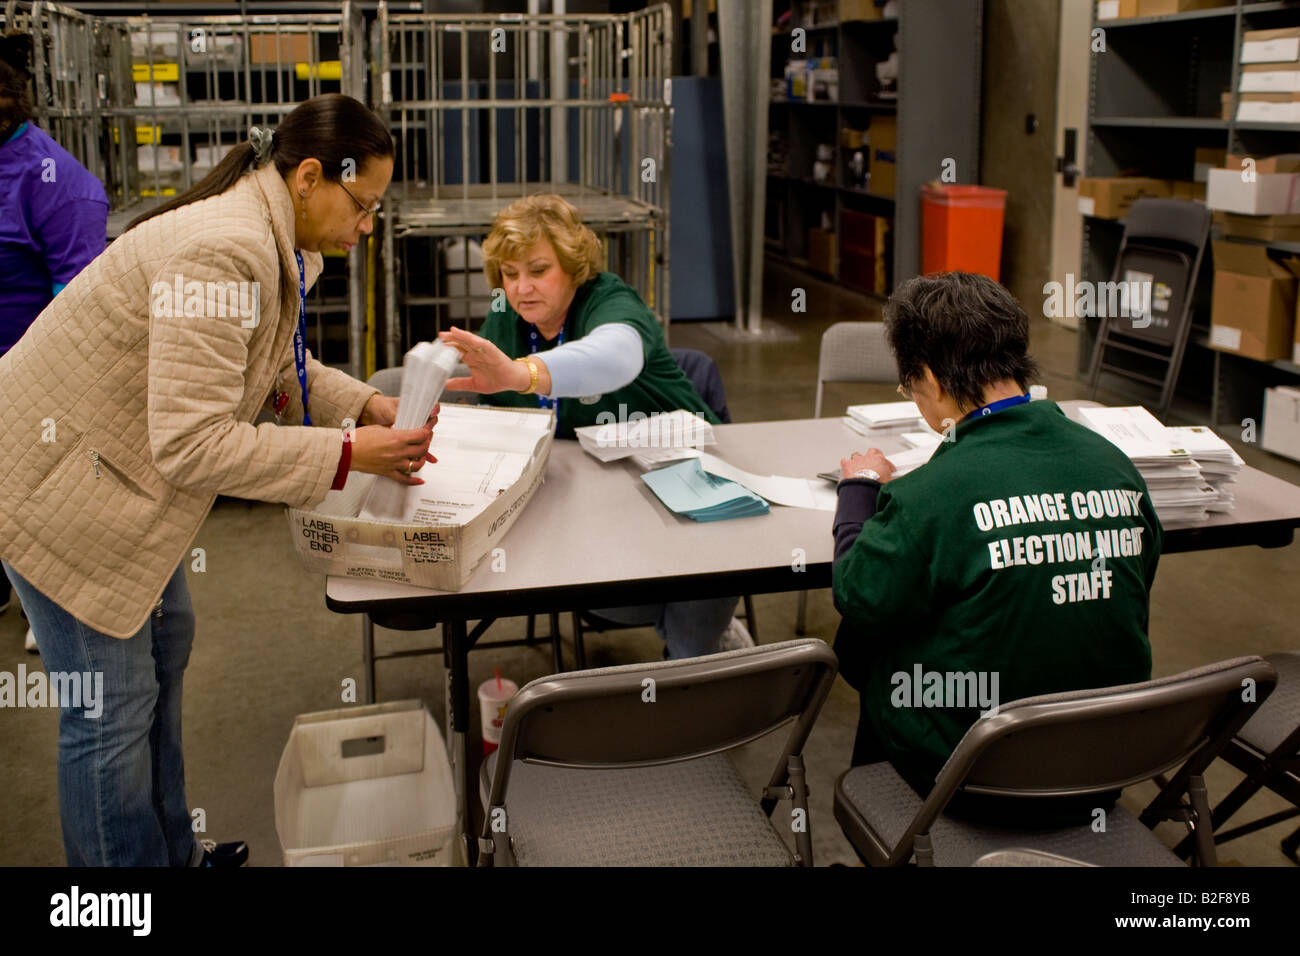 On election night absentee ballots are received and prepared for counting at the Orange County Registrar of Voters  Santa Ana CA Stock Photo